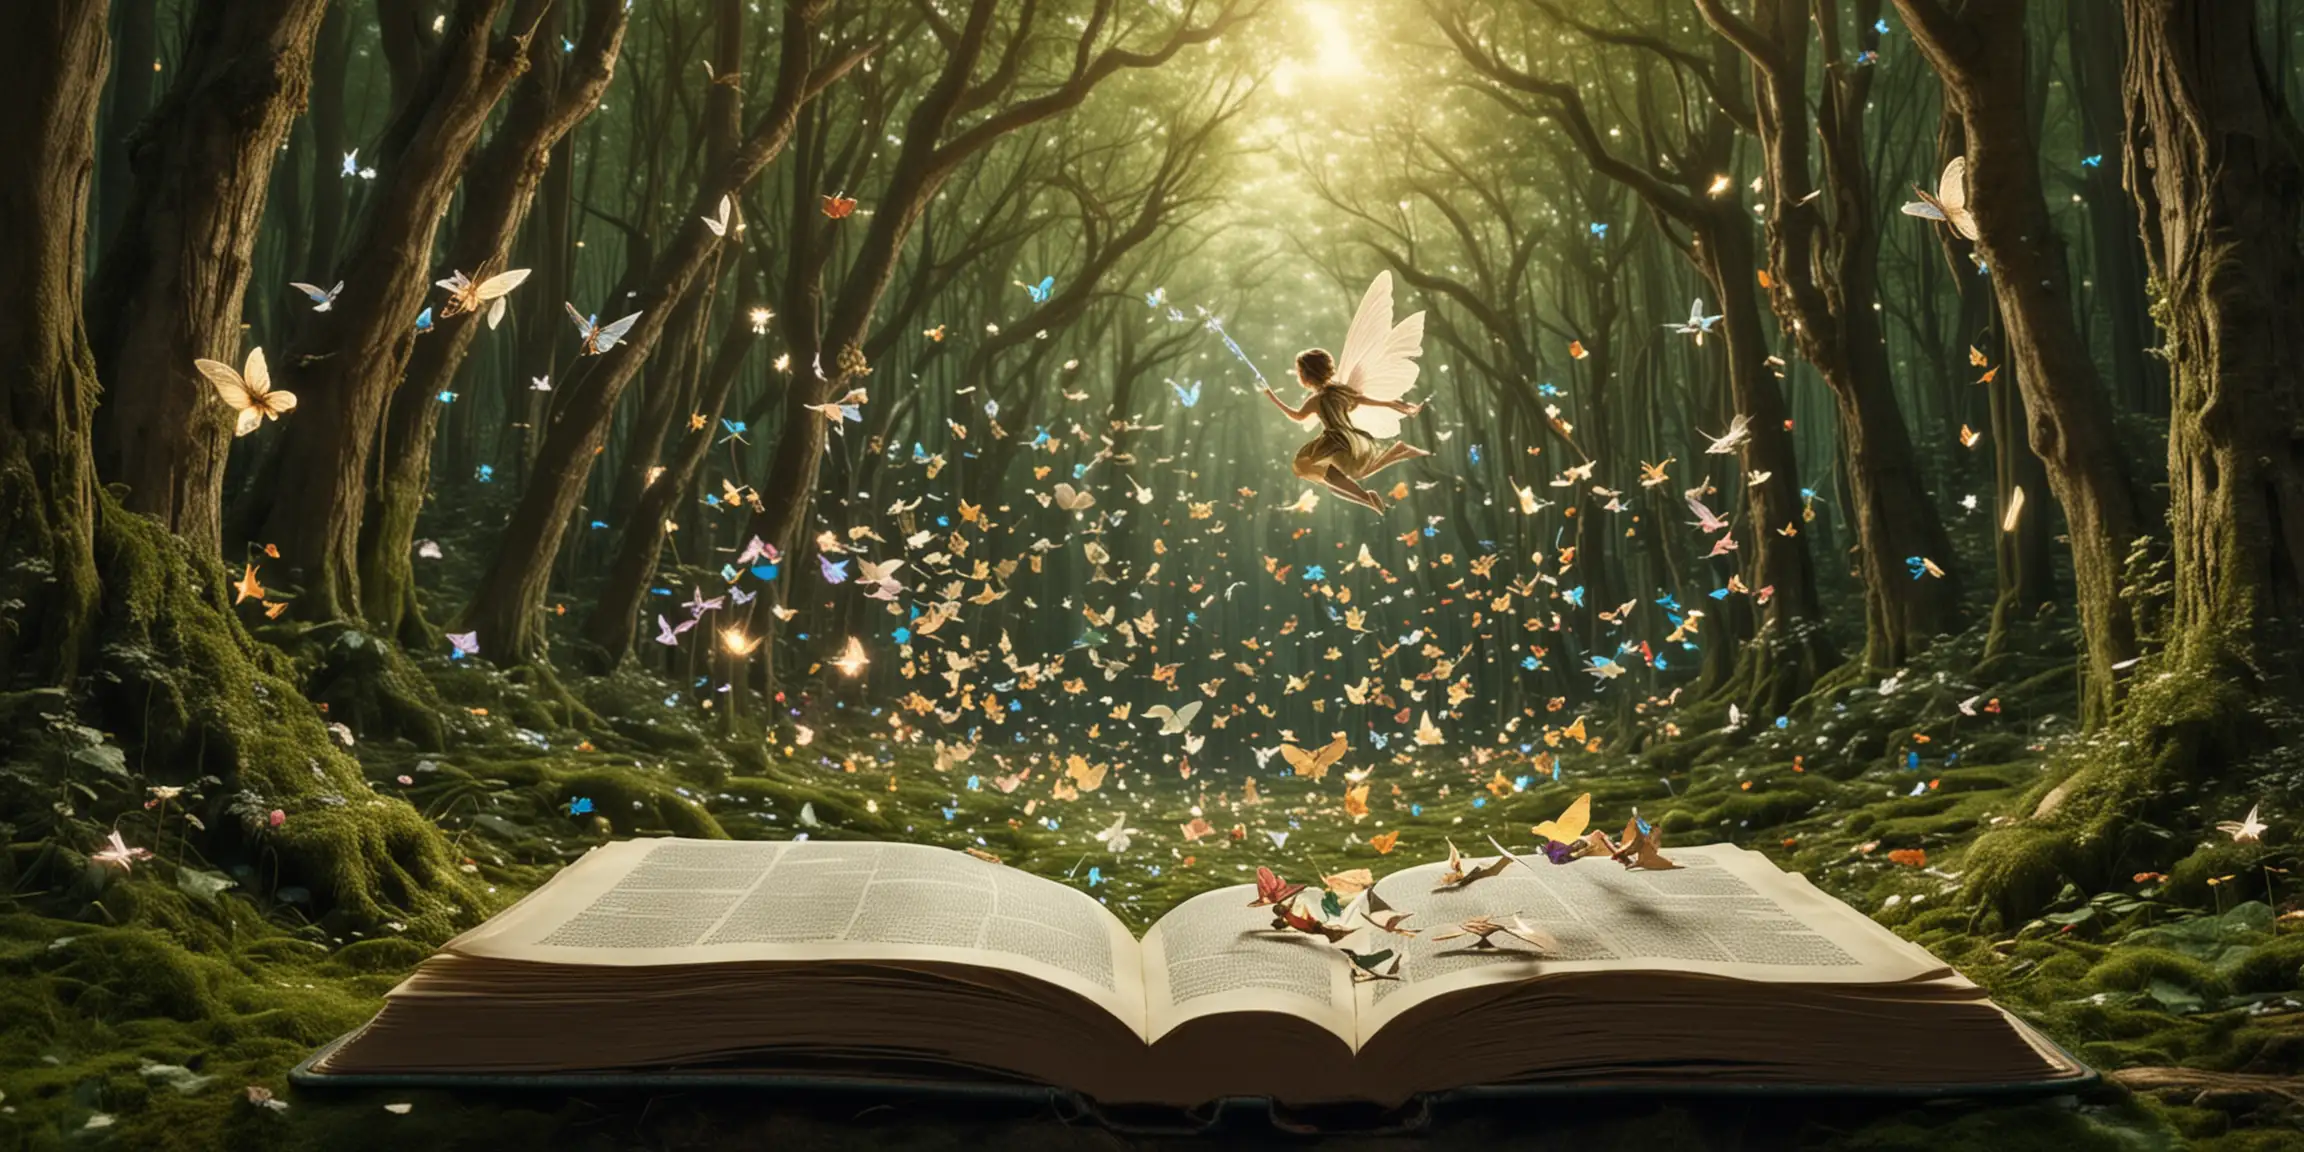 Enchanted Open Book Soaring Through FairyFilled Forest